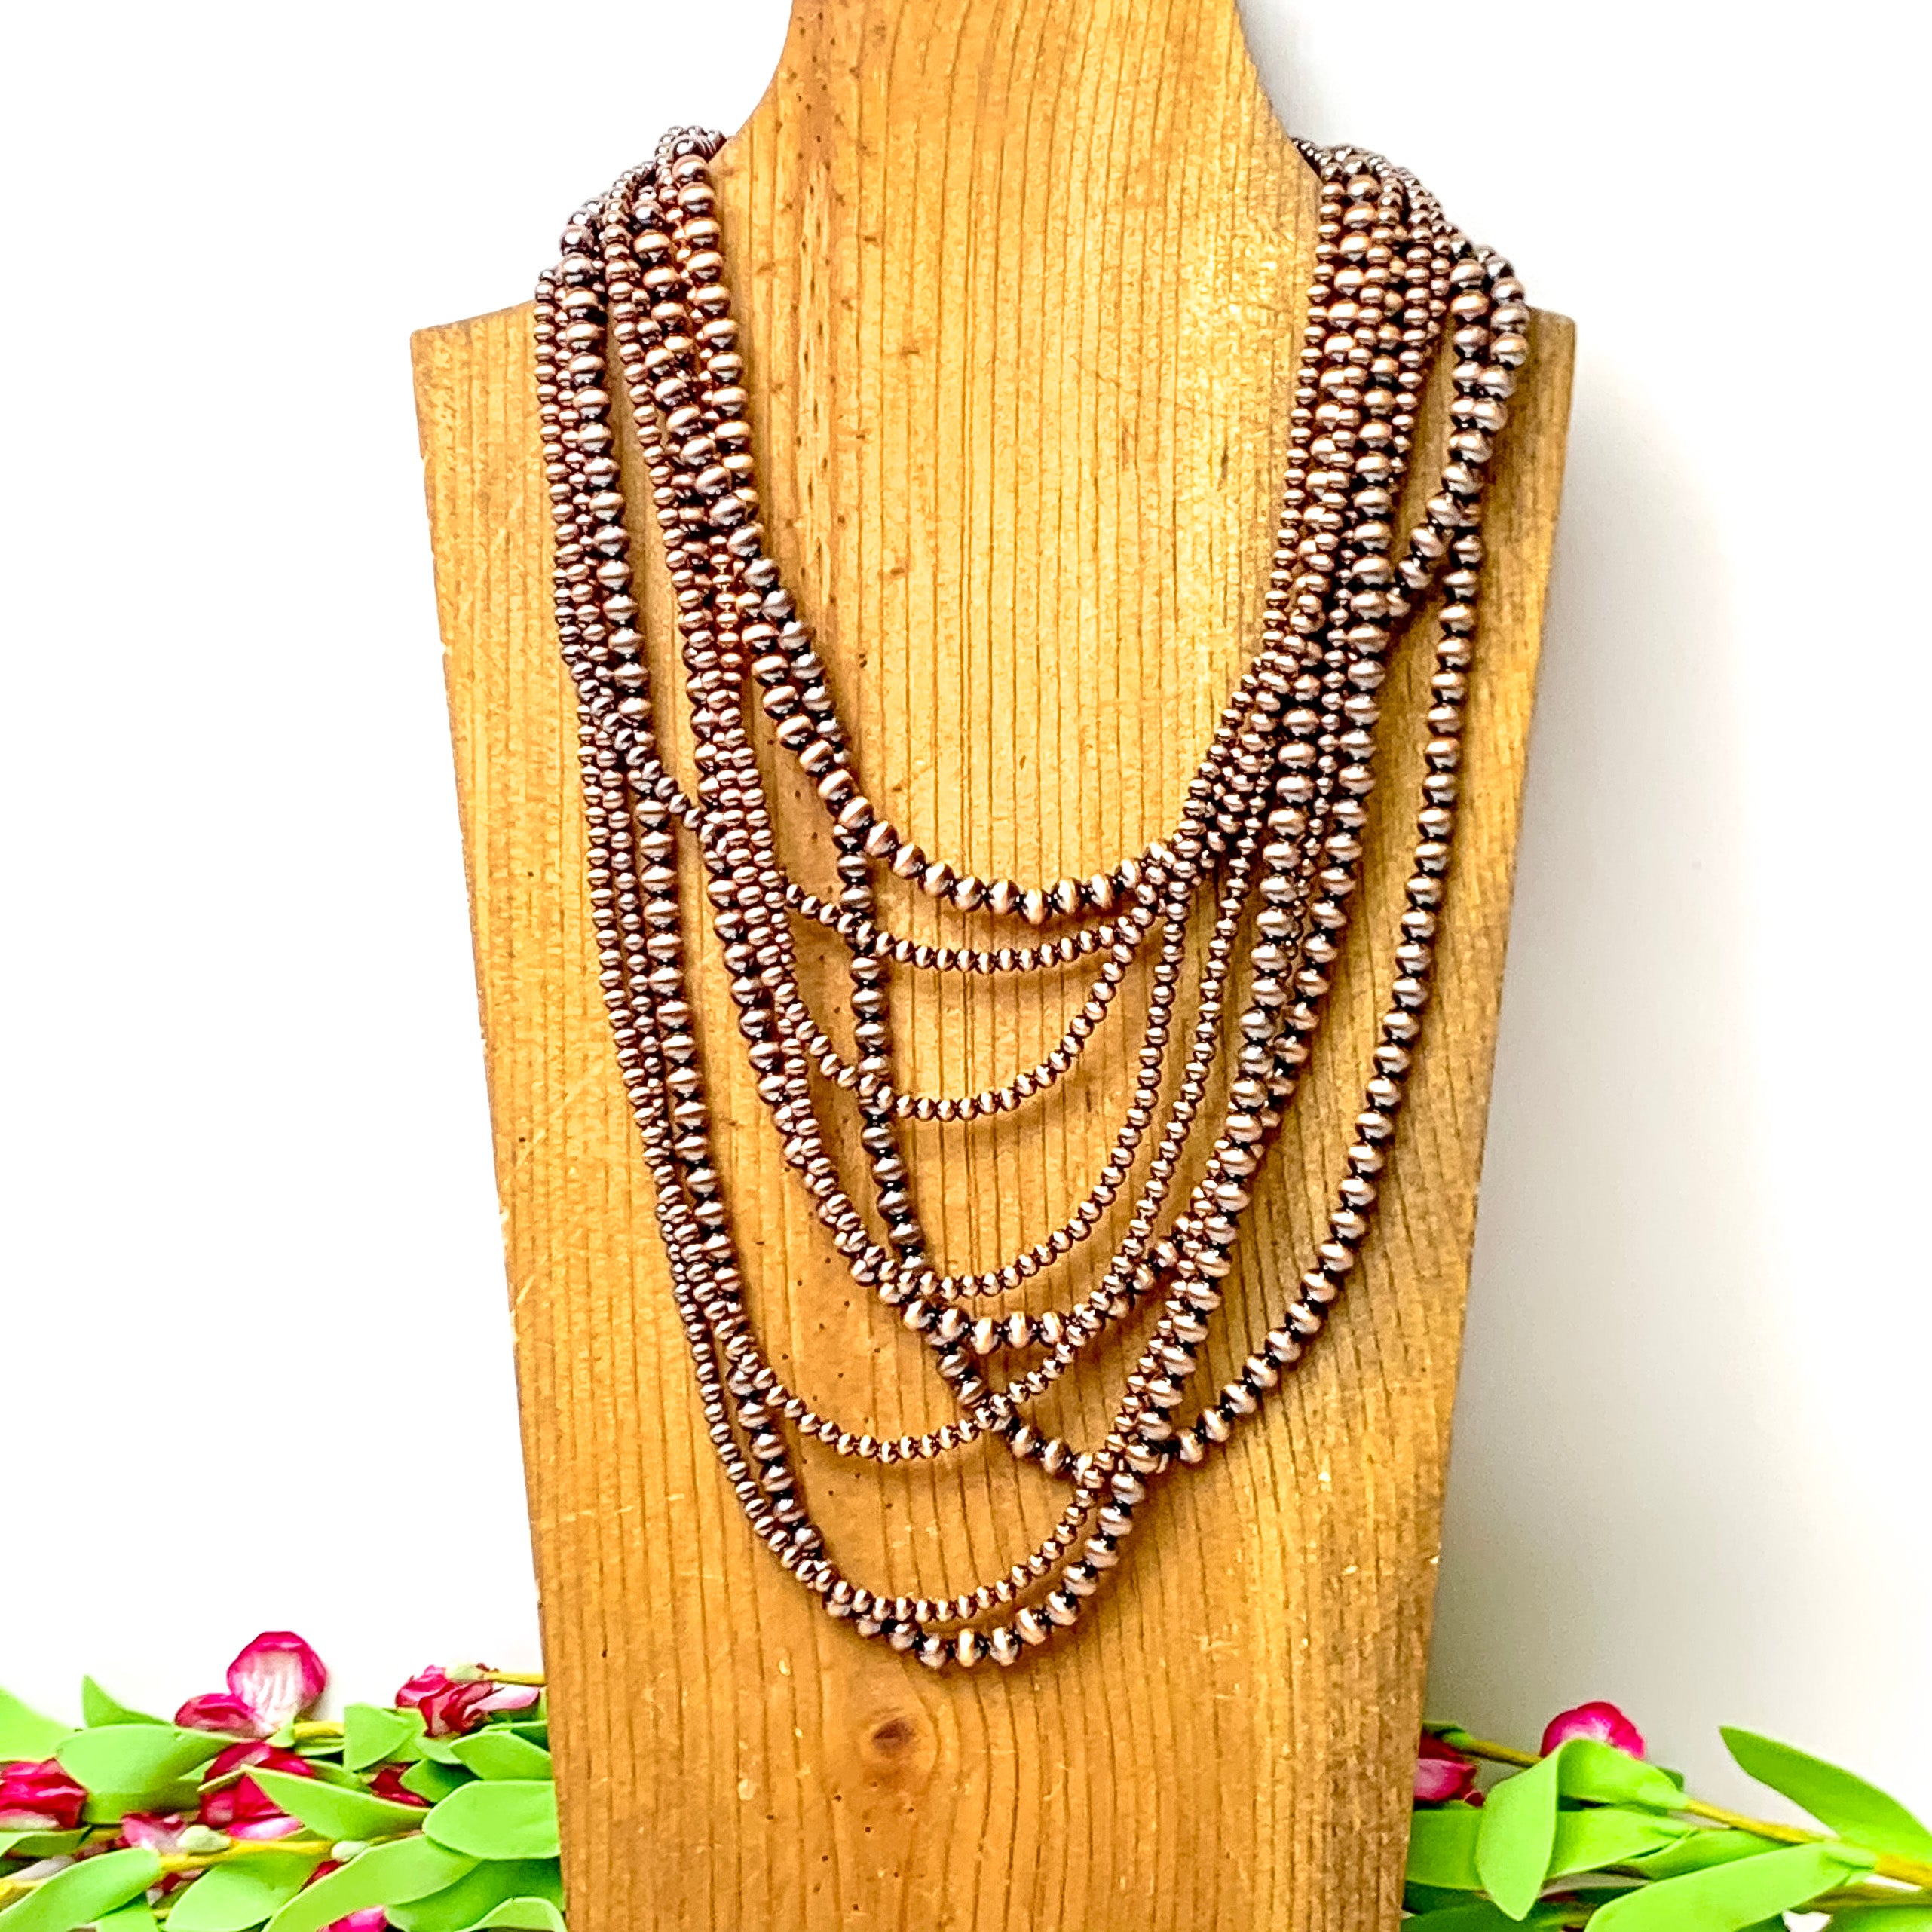 Nine Strand Faux Navajo Pearl Necklace in Copper Tone - Giddy Up Glamour Boutique